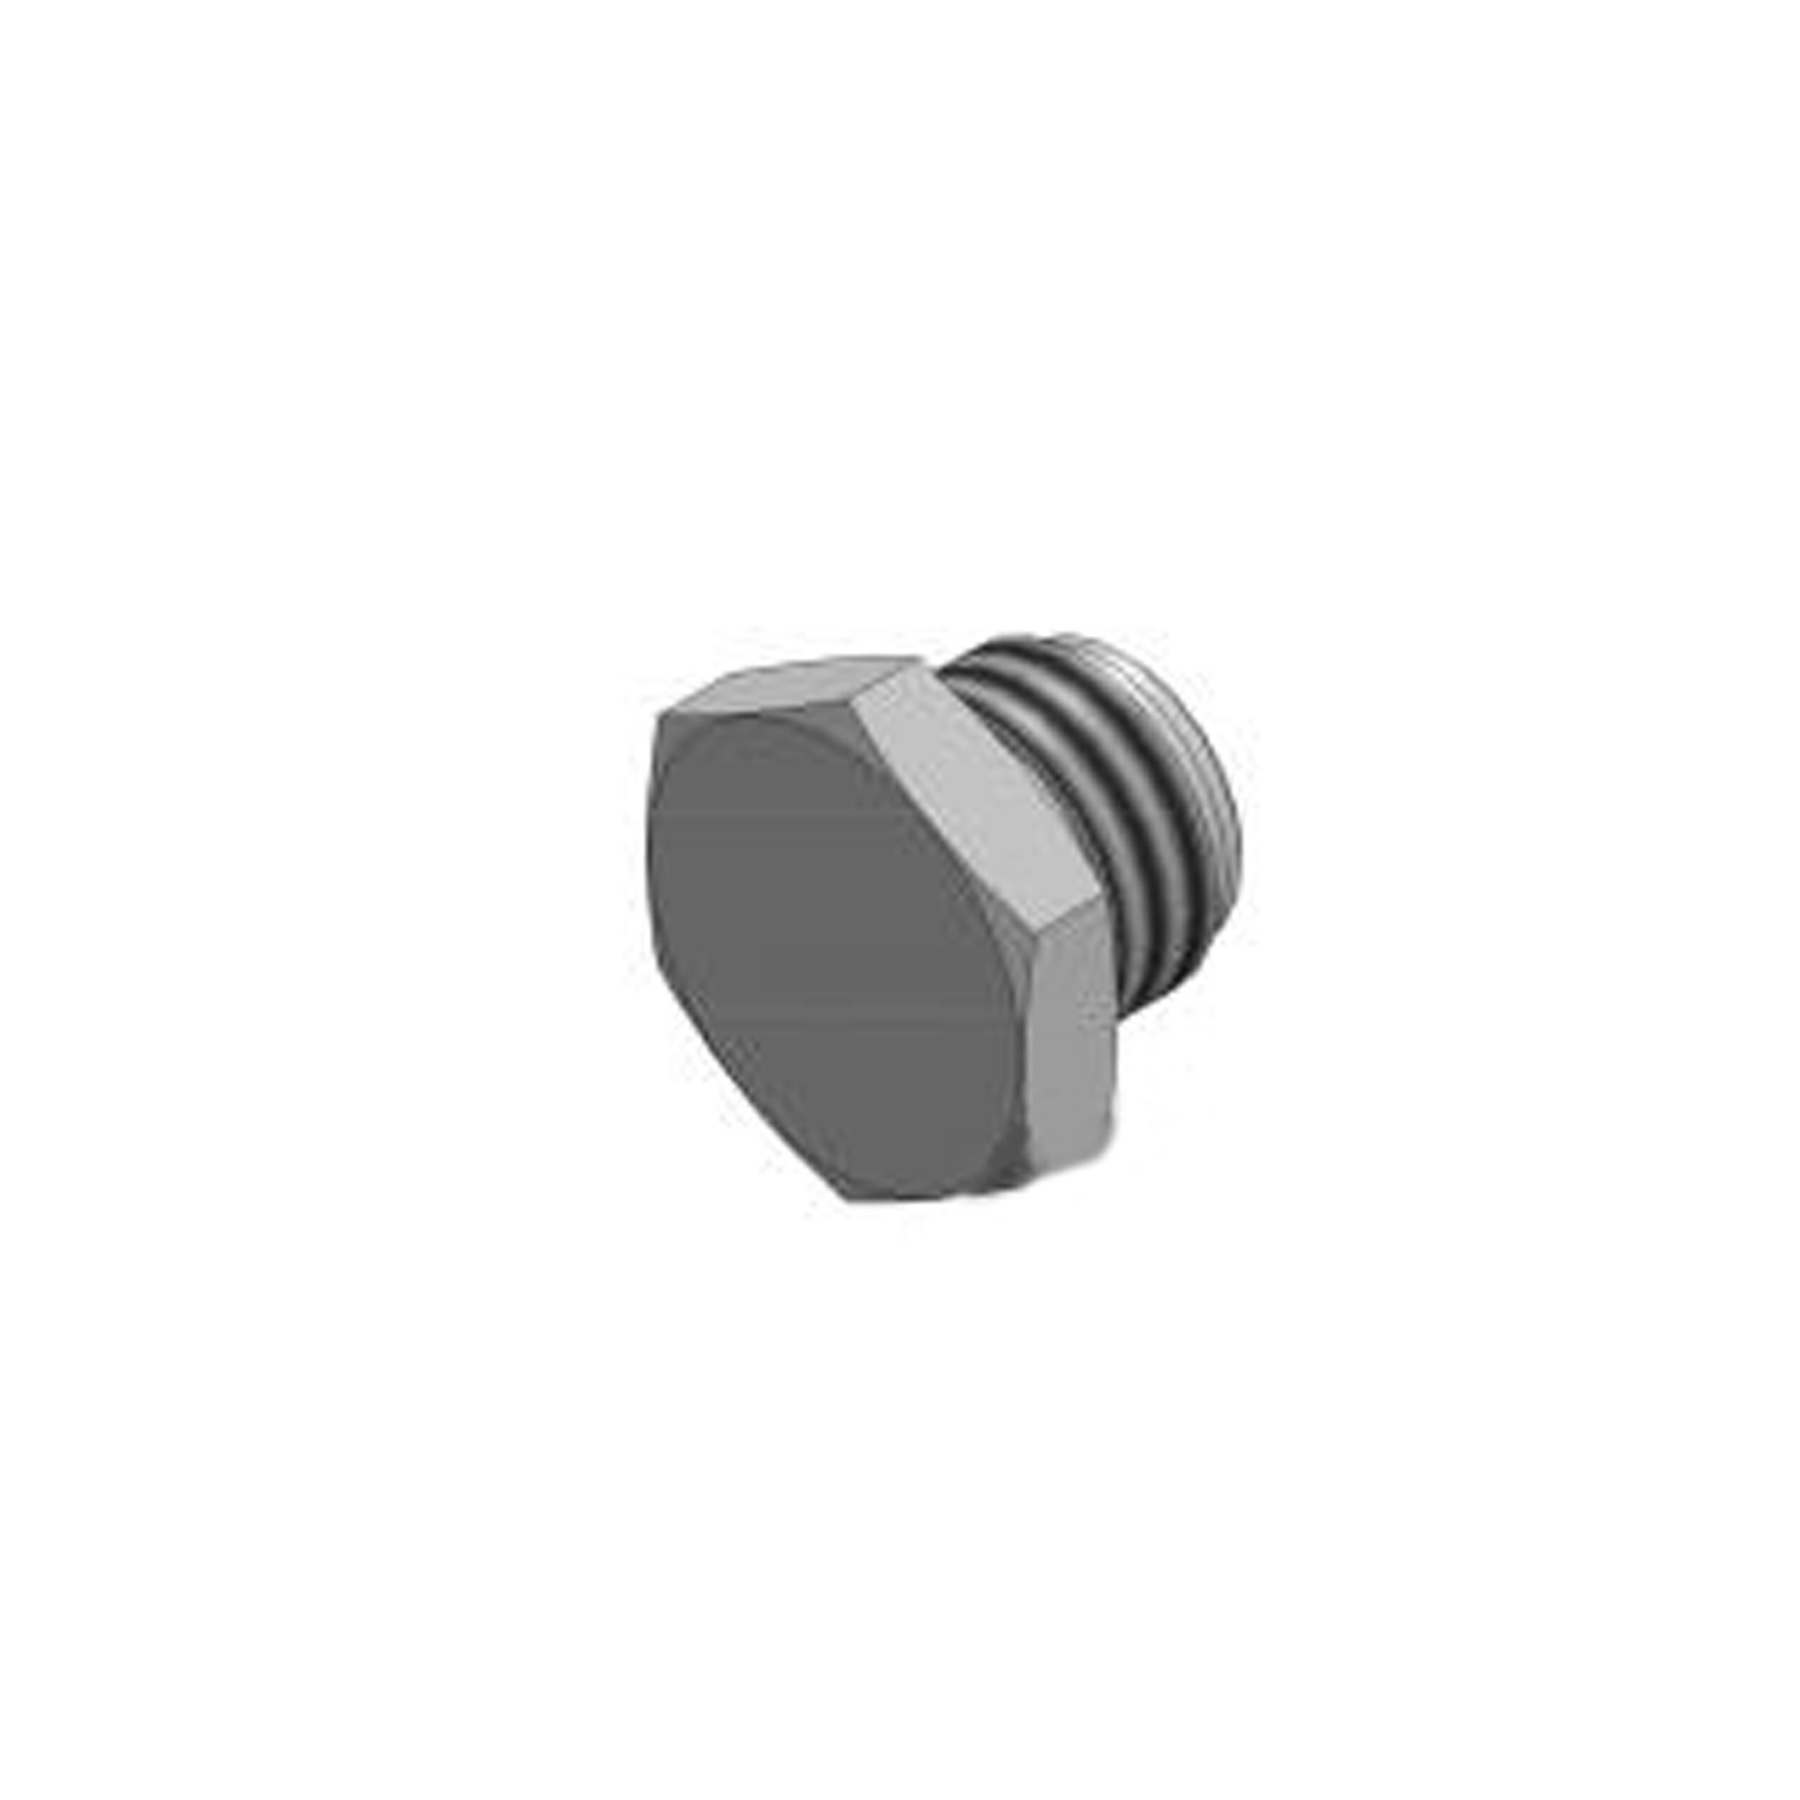 Oil Pan Drain Plug for MACK MP7/MP8 Replaces # 20571854 (Magnetic)  (Includes Washer MAK20579690)